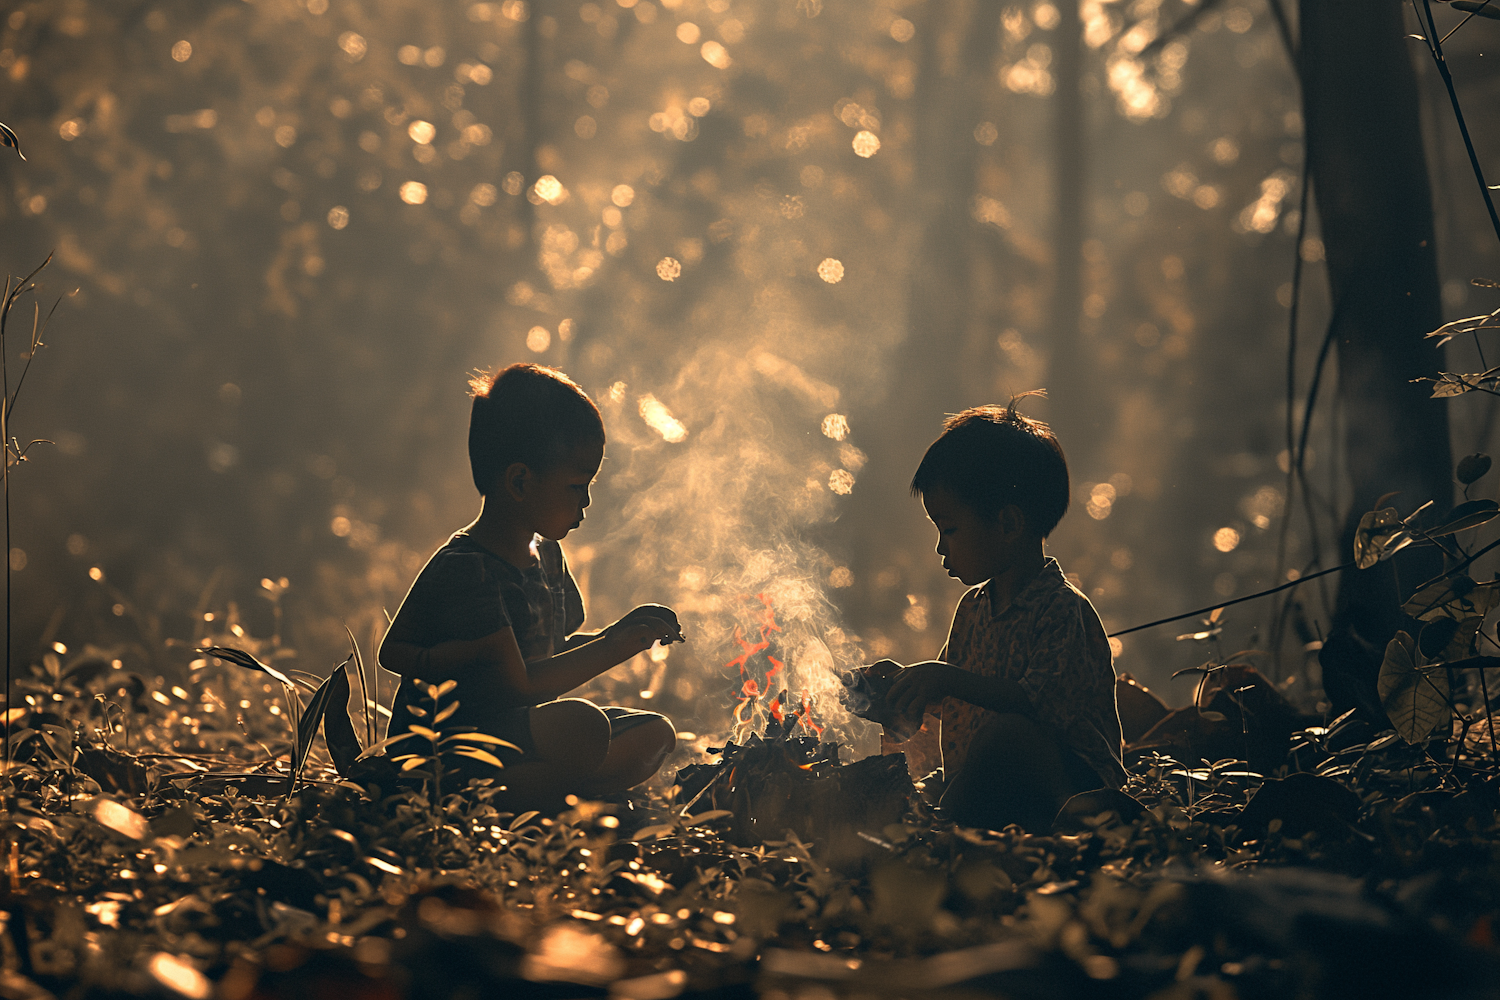 Childhood Serenity by the Firelight